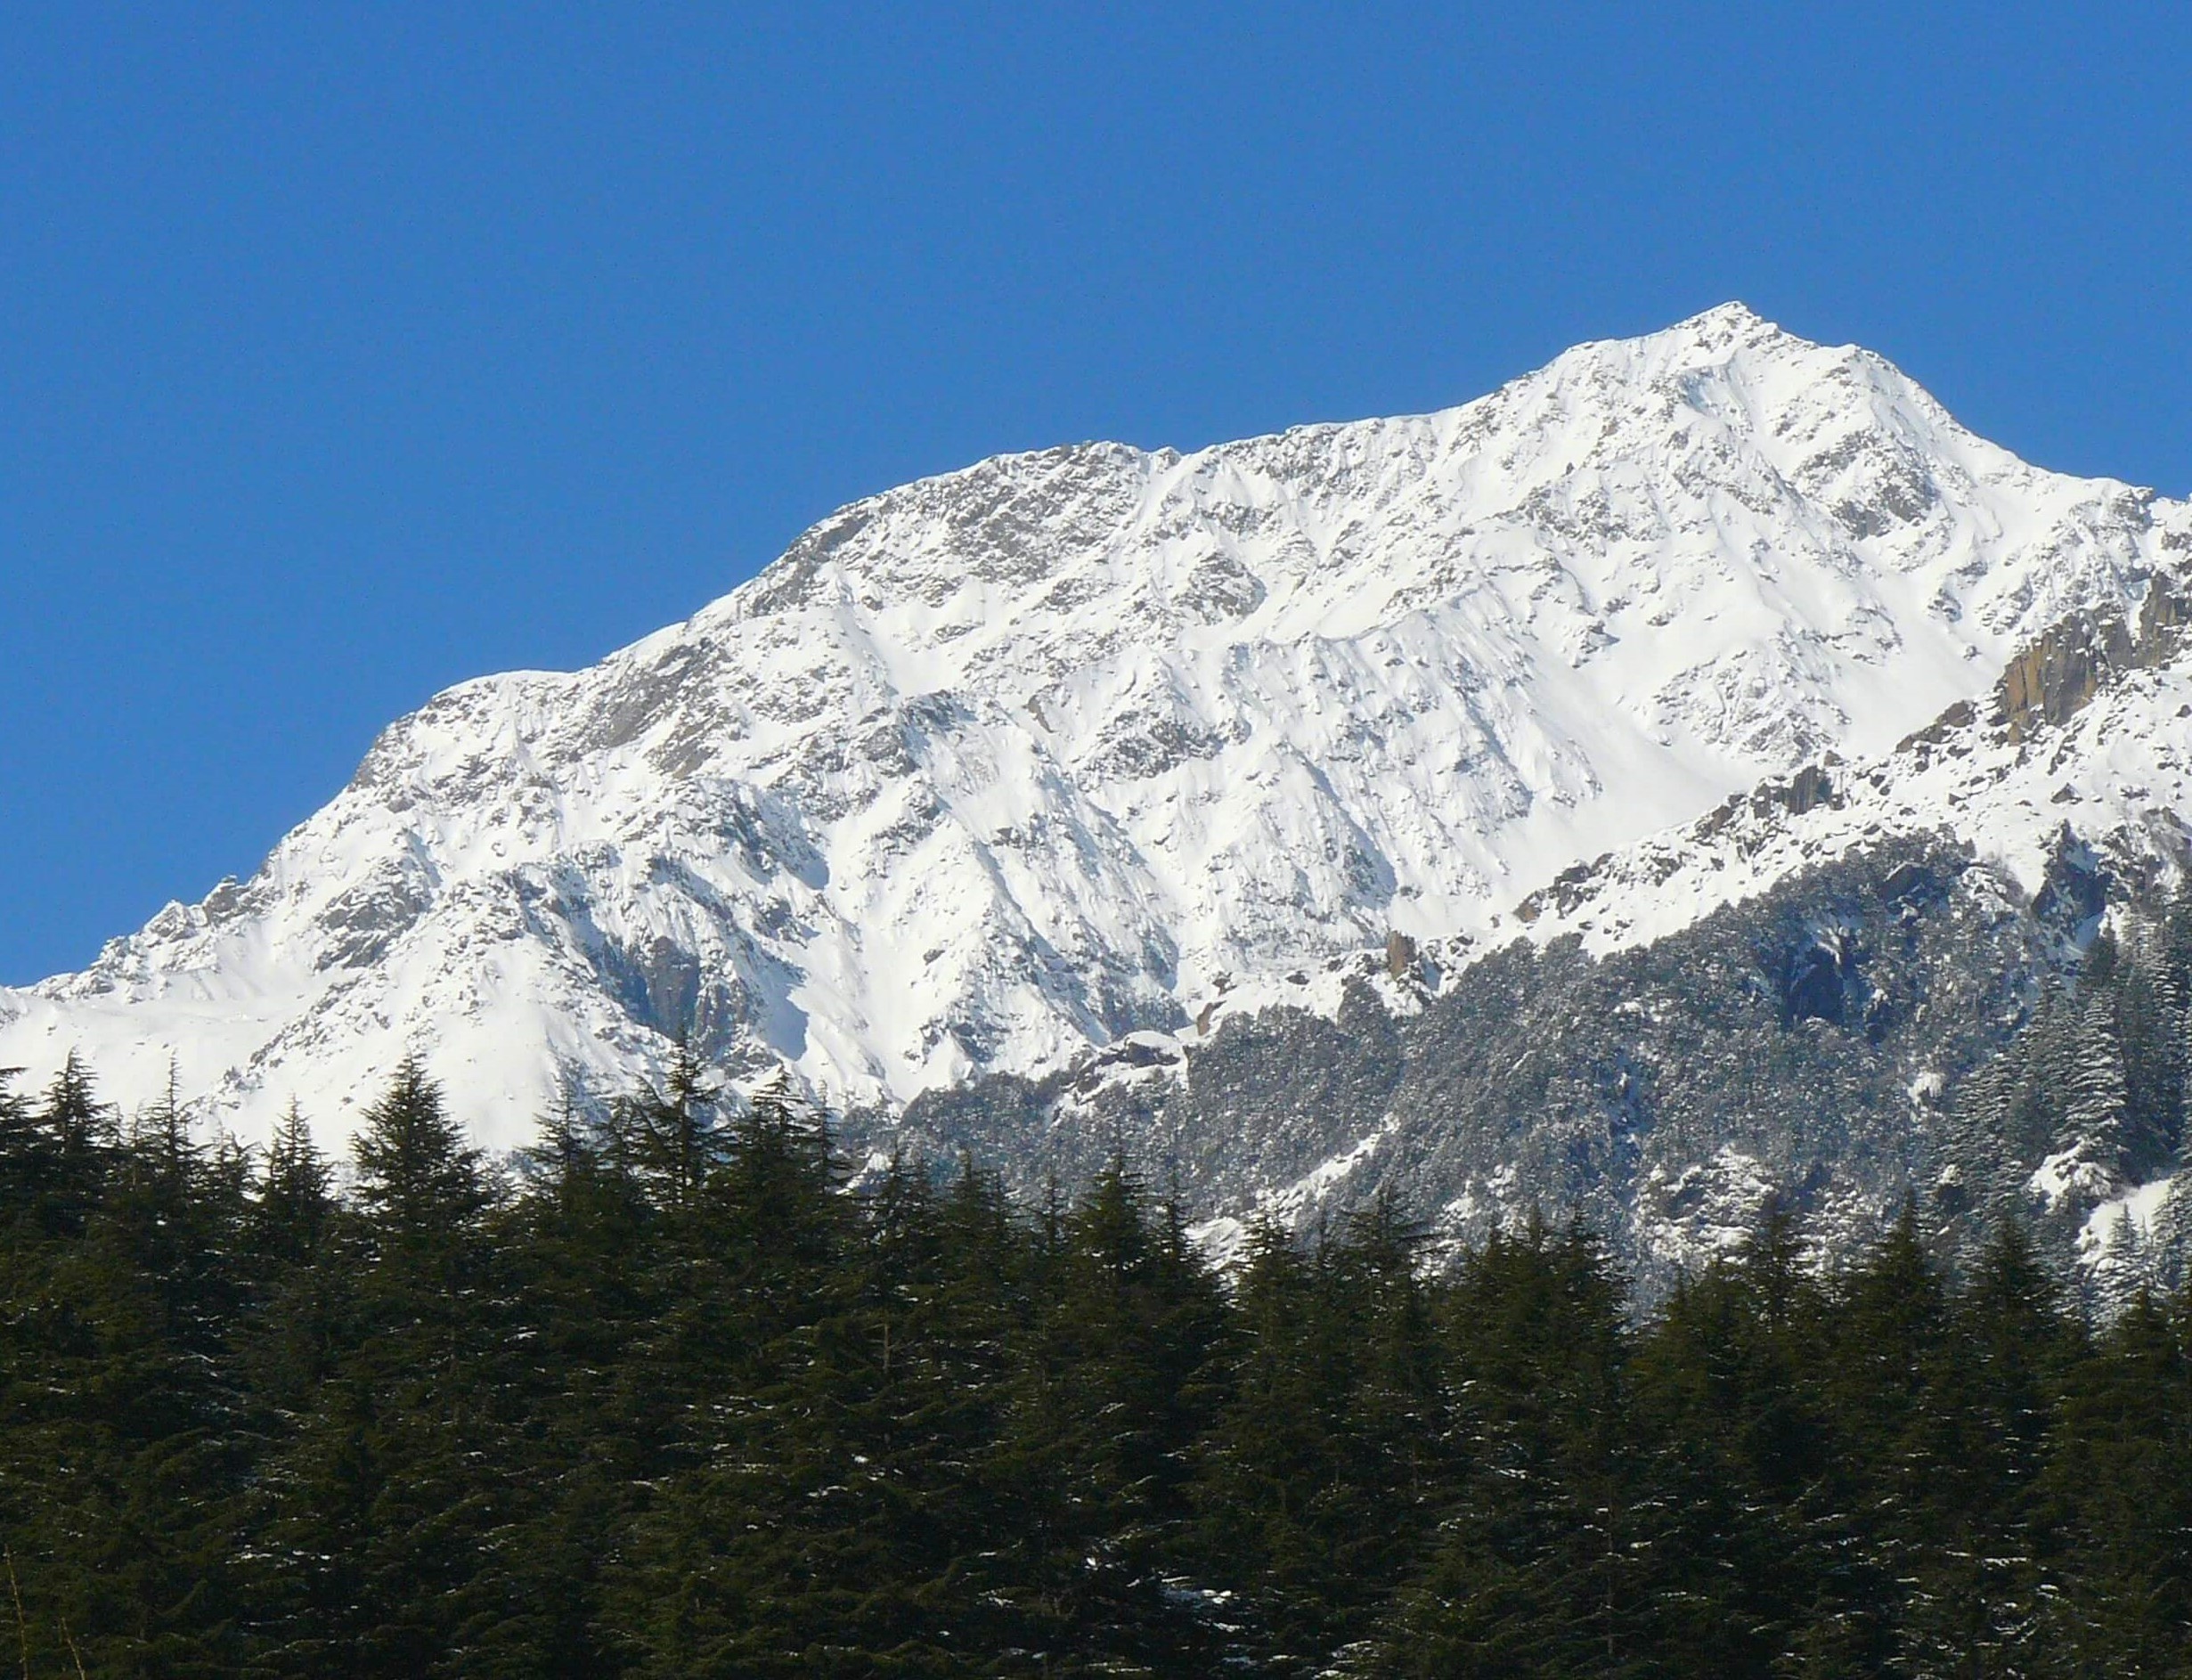 Manali, a most important hill station in Himachal Pradesh